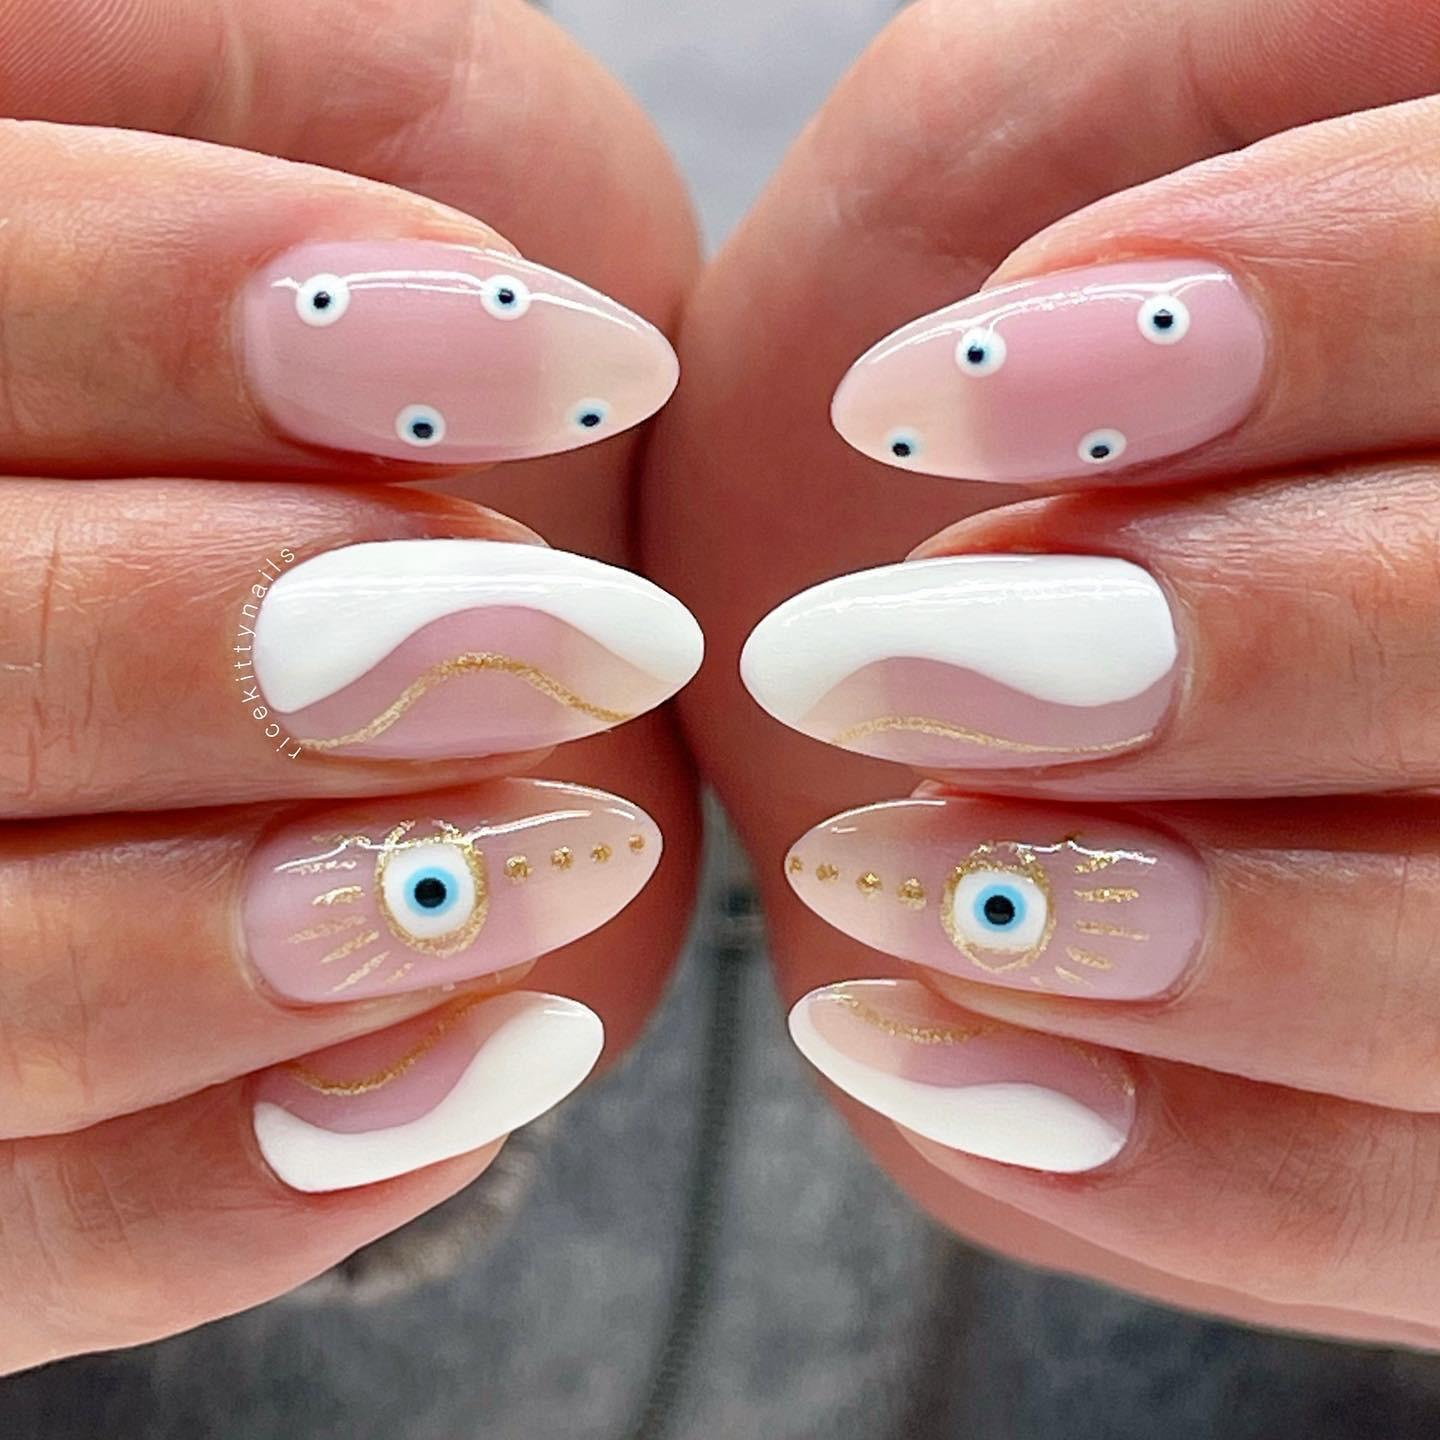 35 Nail Designs For 2022 You’ll Want To Try Immediately images 9